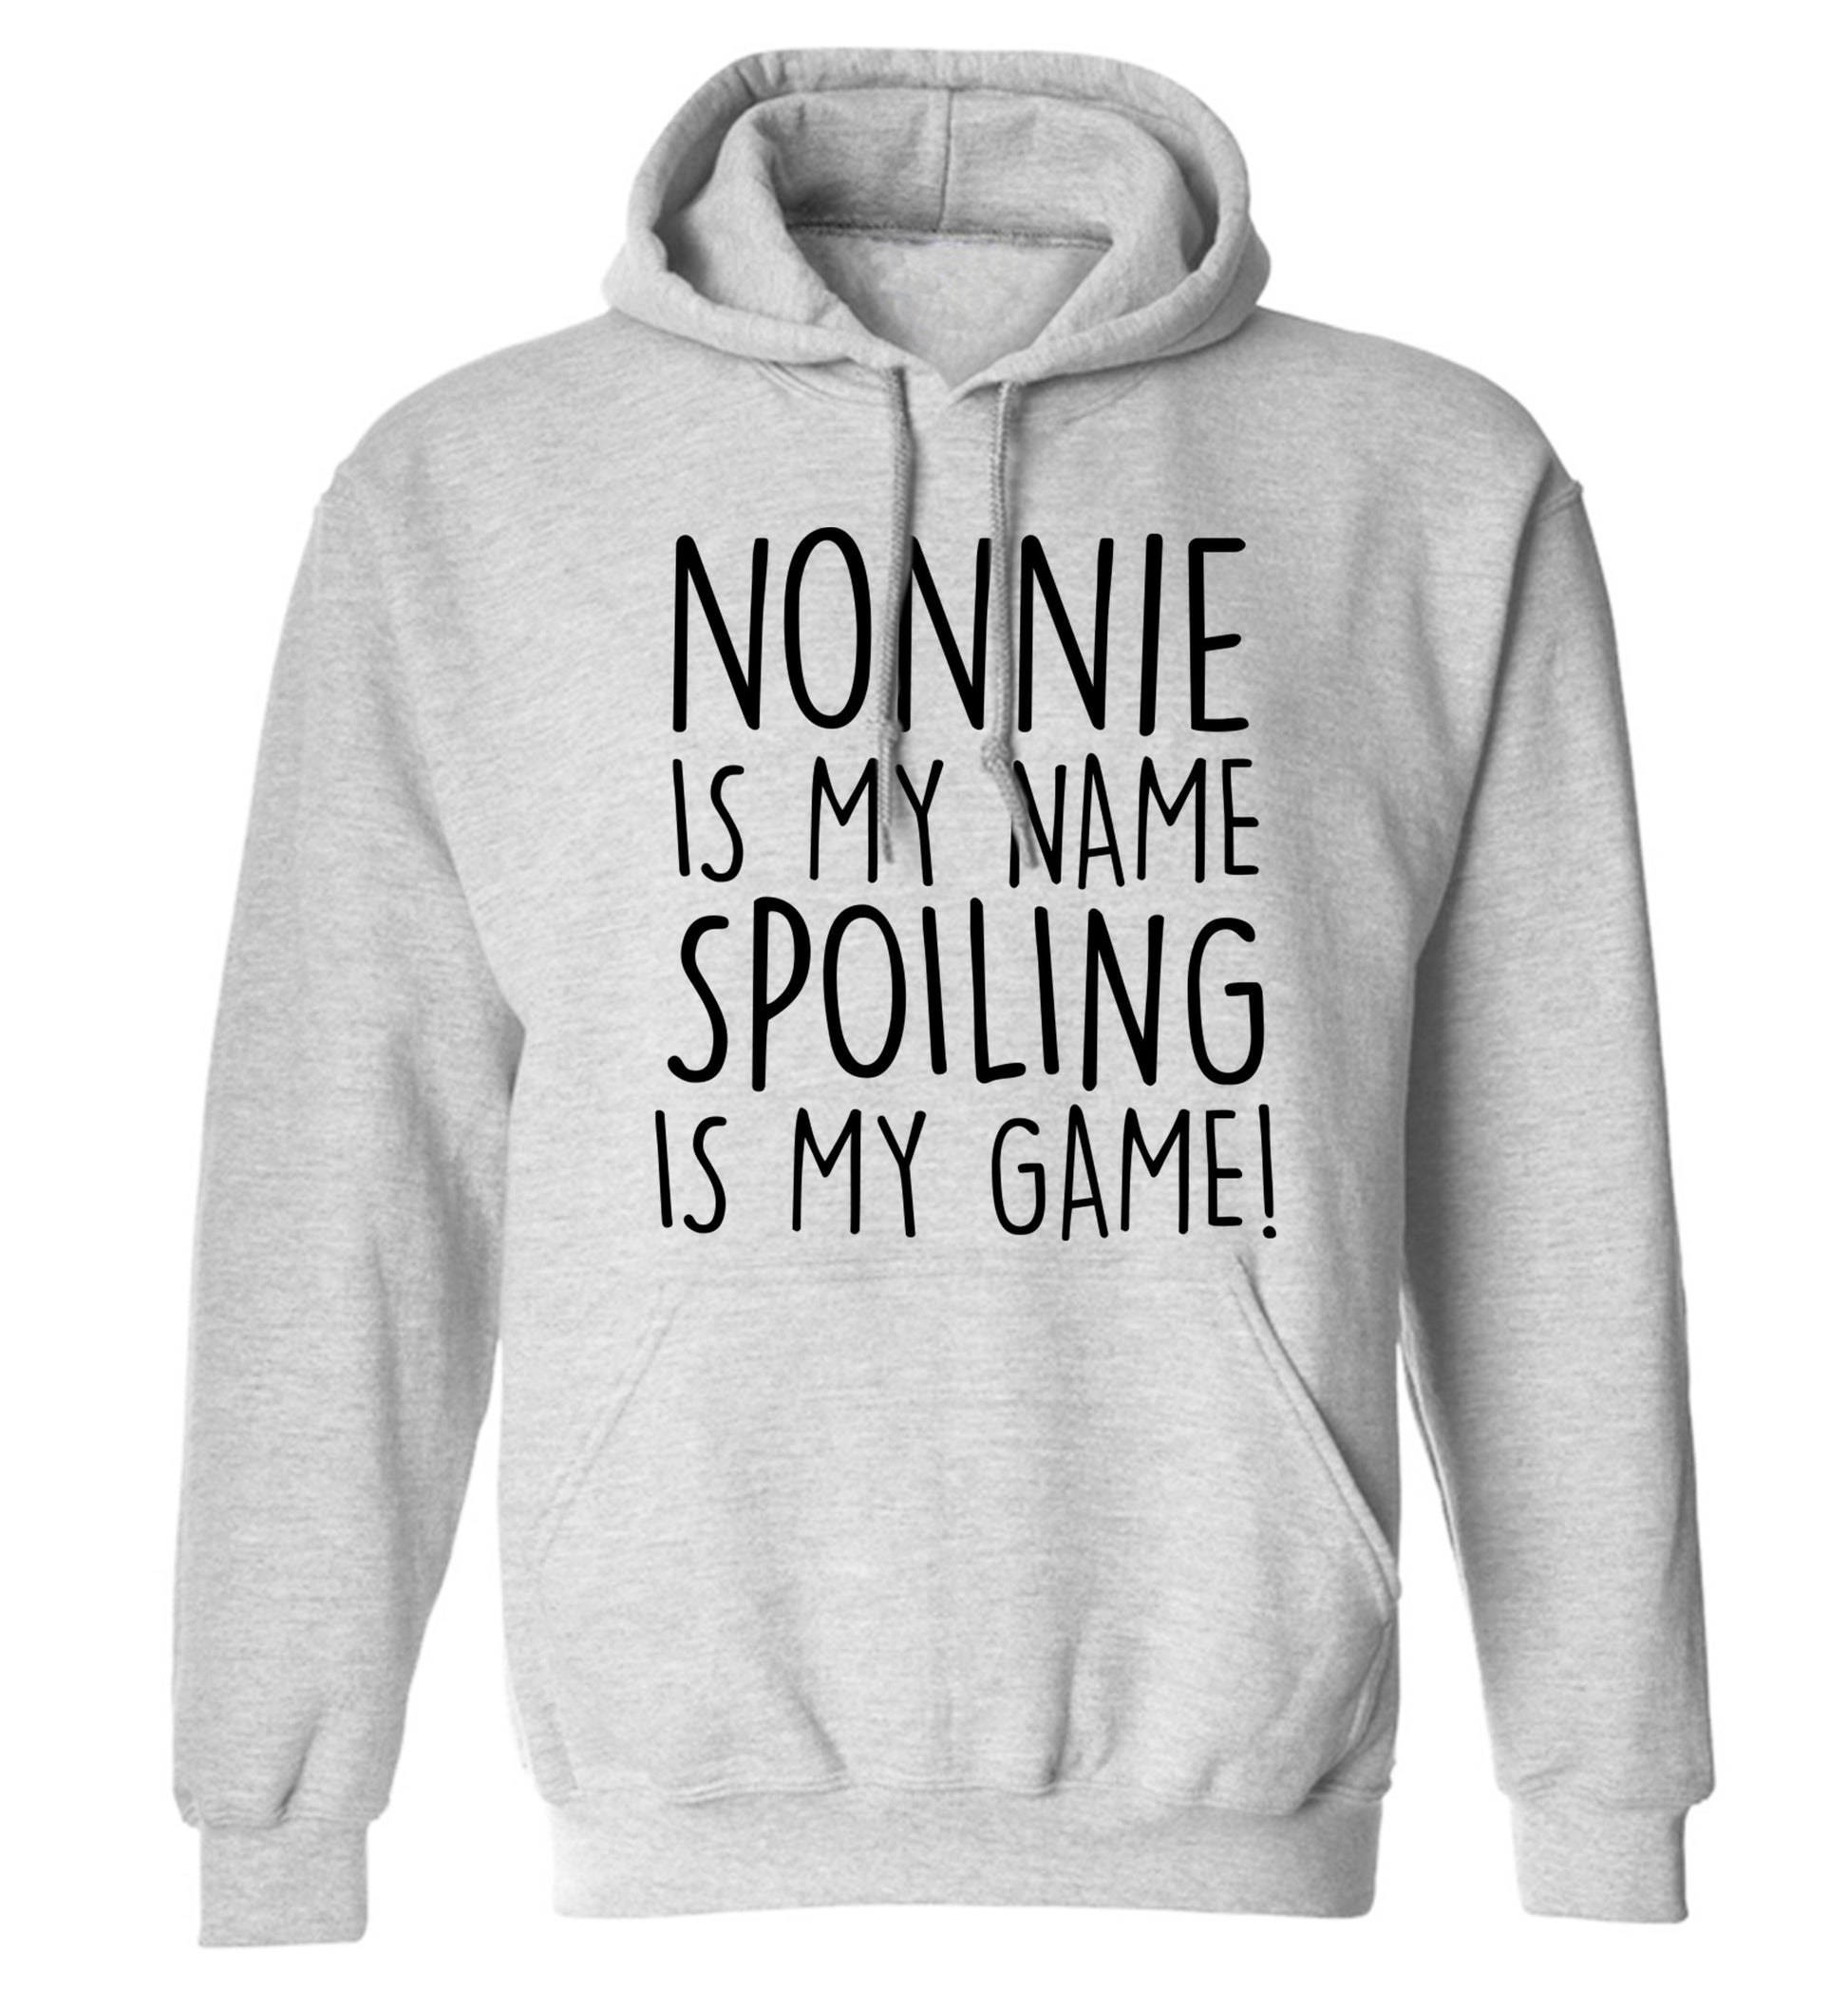 Nonnie is my name, spoiling is my game adults unisex grey hoodie 2XL